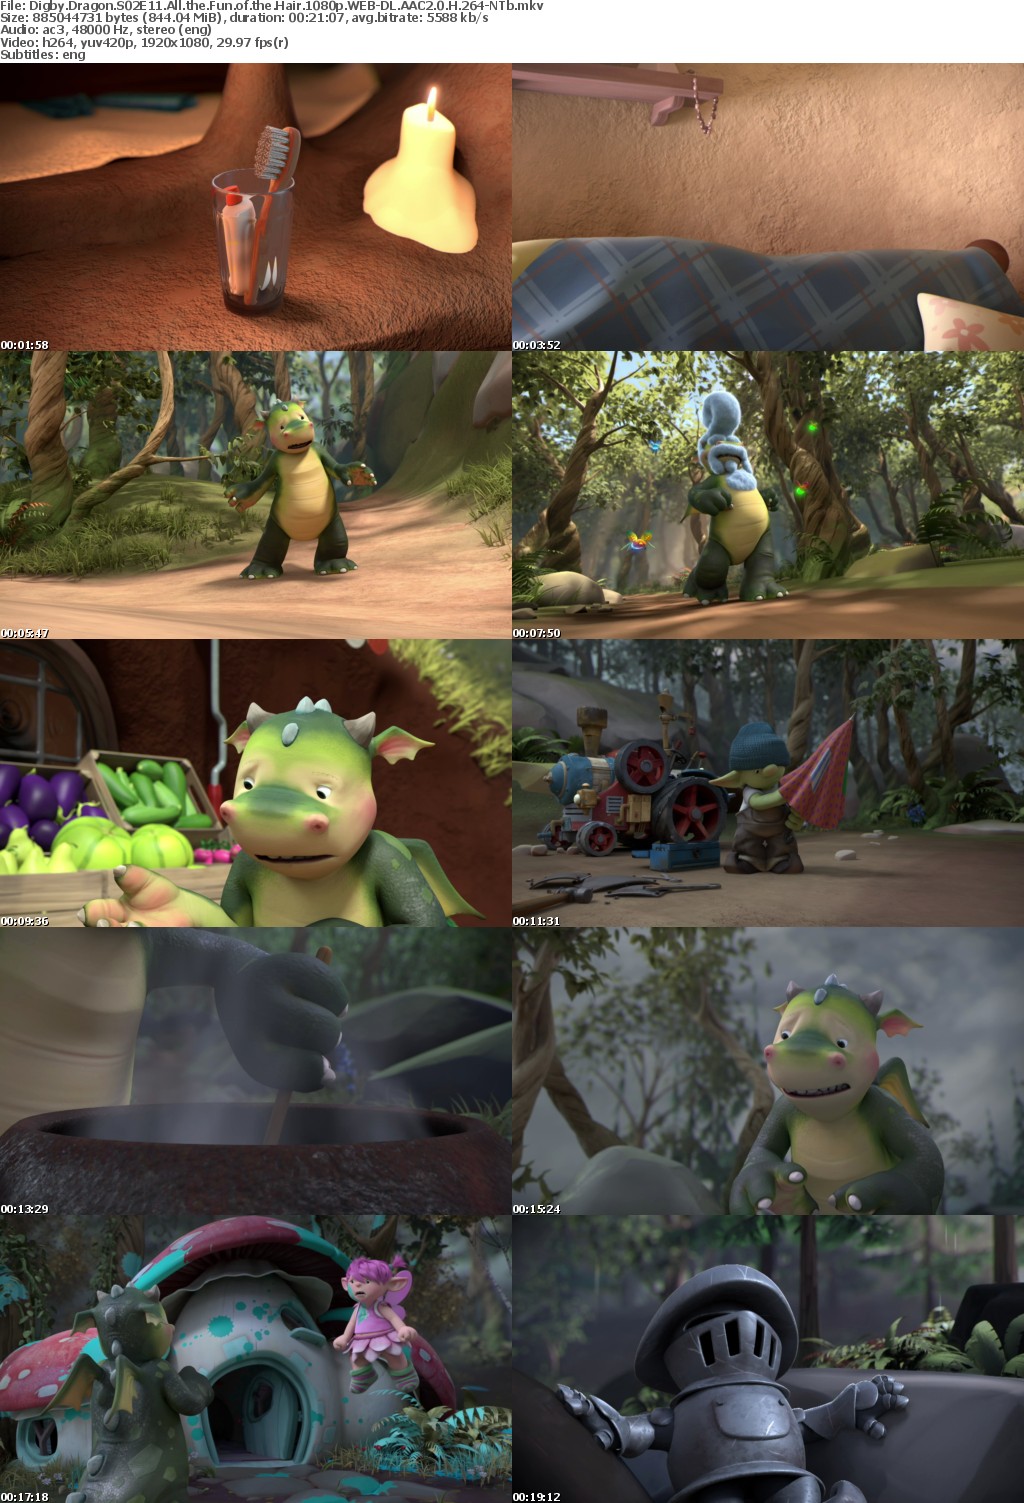 Digby Dragon S02E11 All the Fun of the Hair 1080p WEB-DL AAC2 0 H 264-NTb